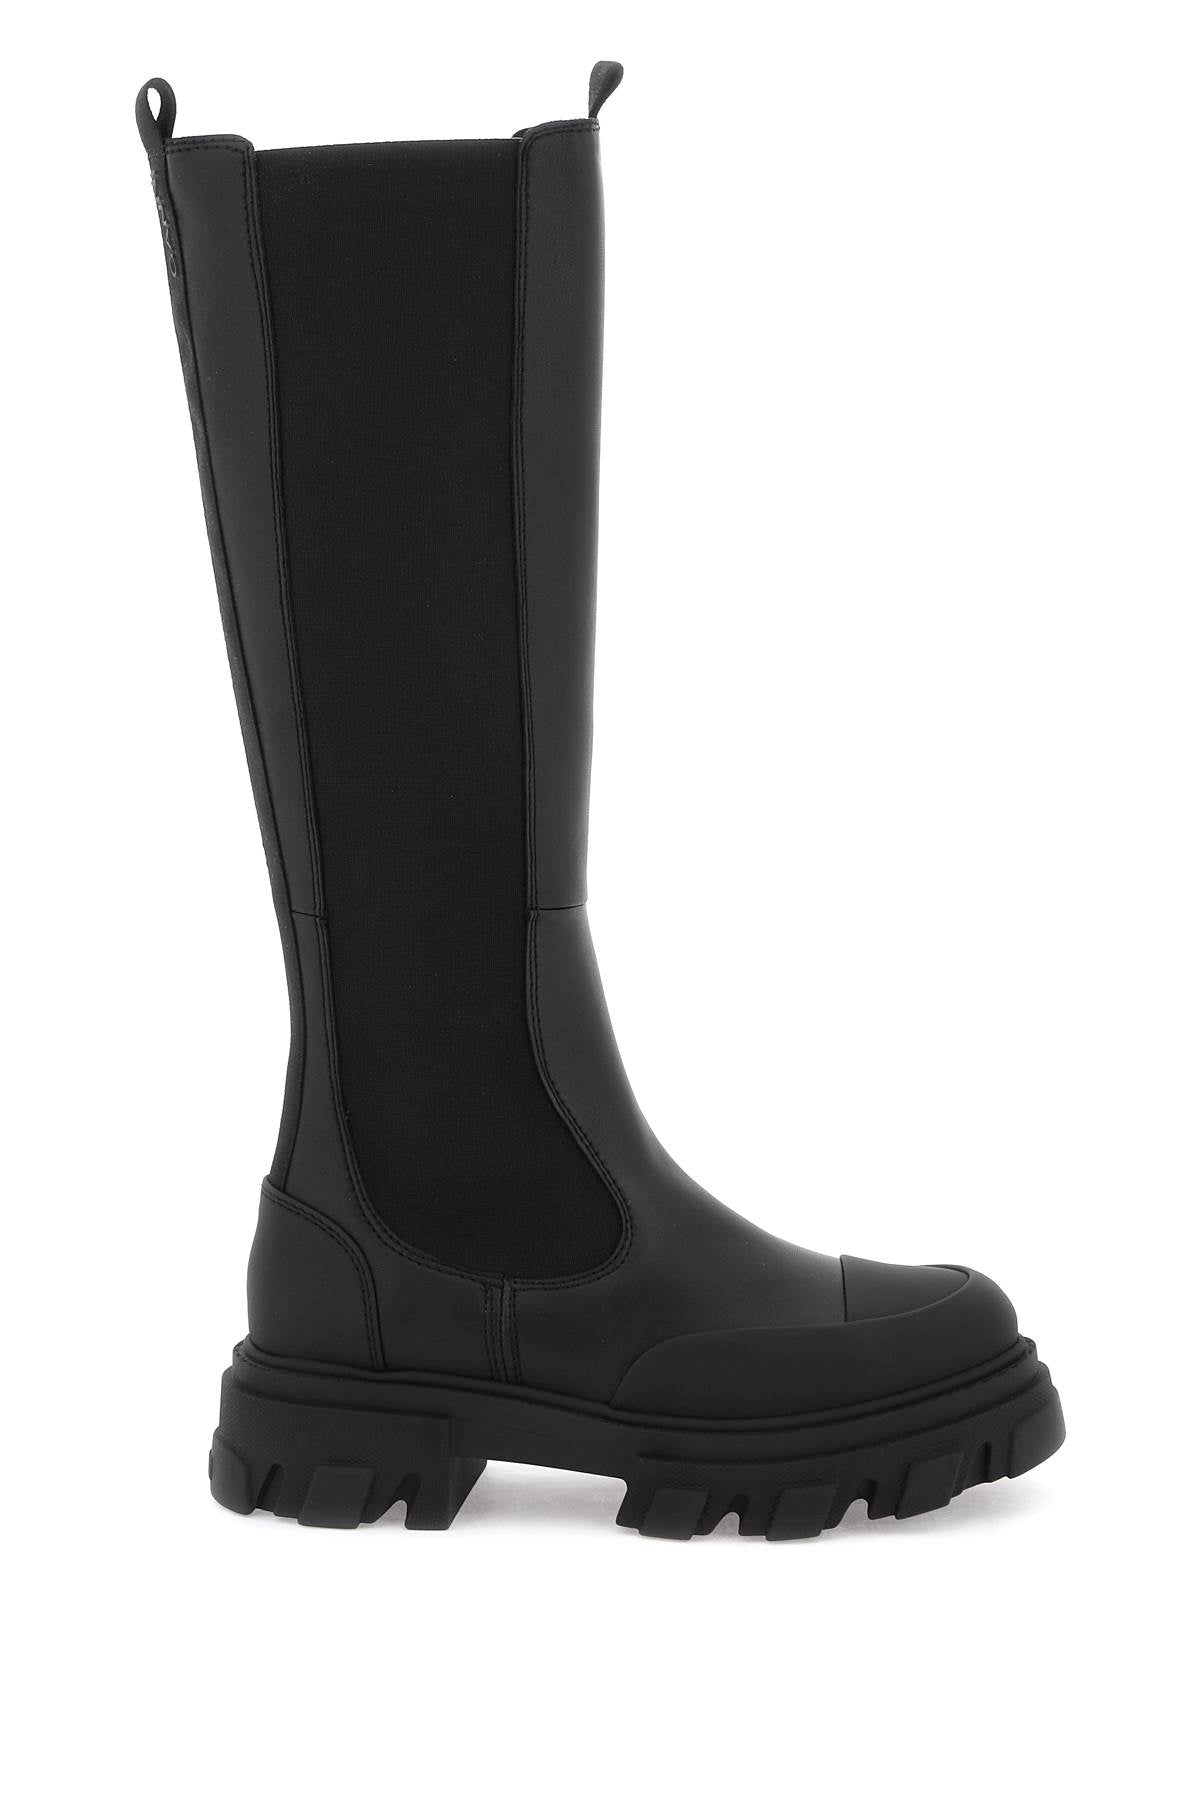 Ganni Cleated High Chelsea Boots Black